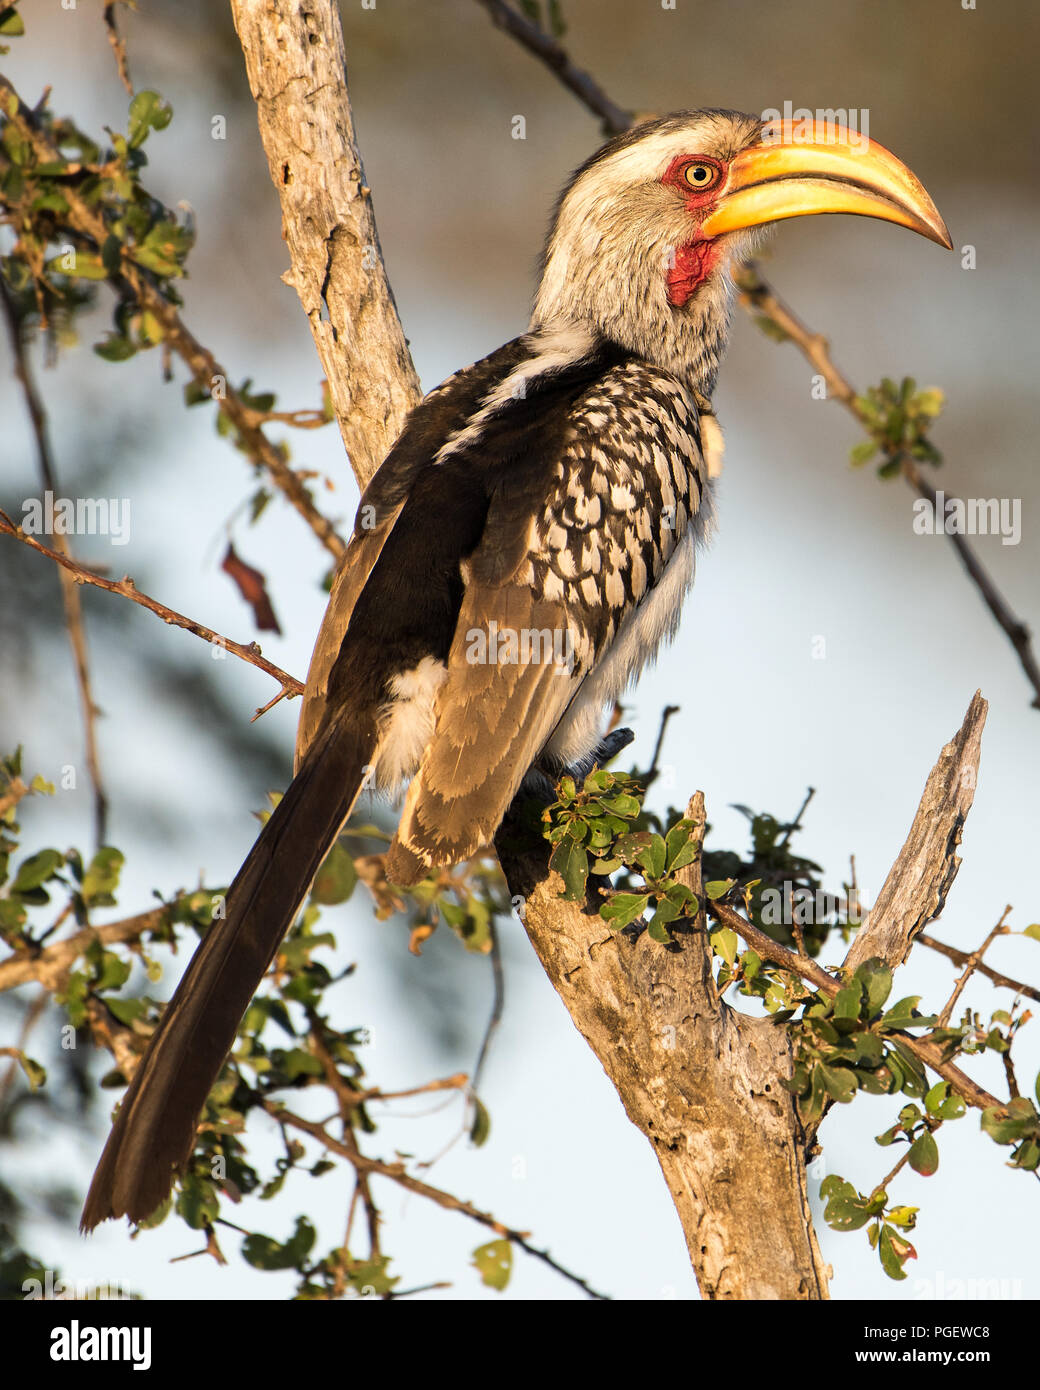 Side view of beautiful Yellow-billed Hornbill bird sitting in a tree. Stock Photo